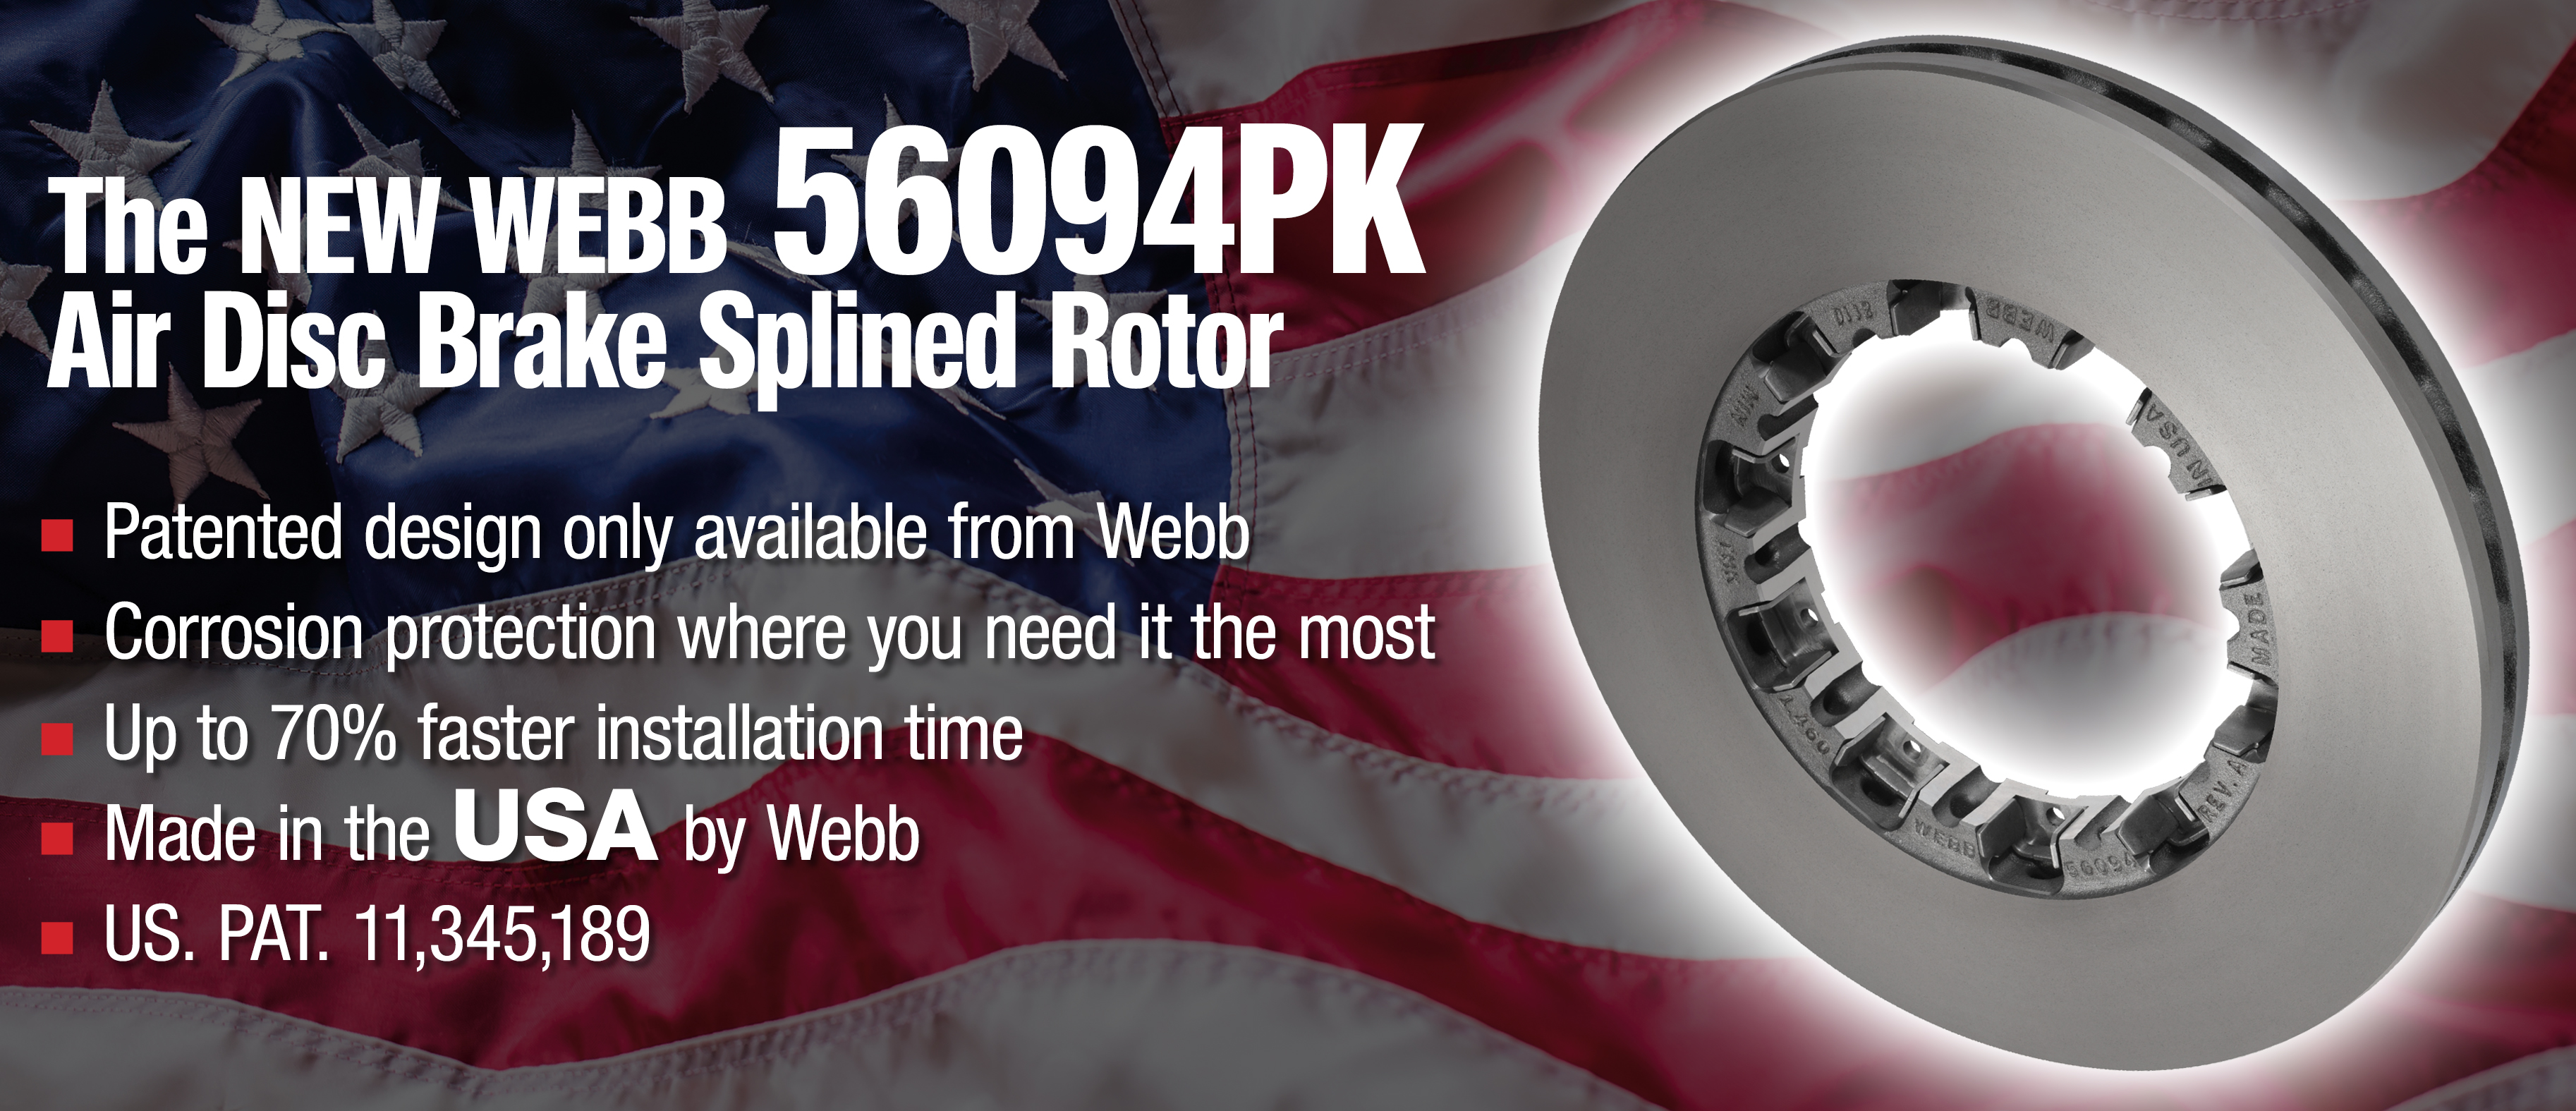 56094PK rotors fight corrosion and rust